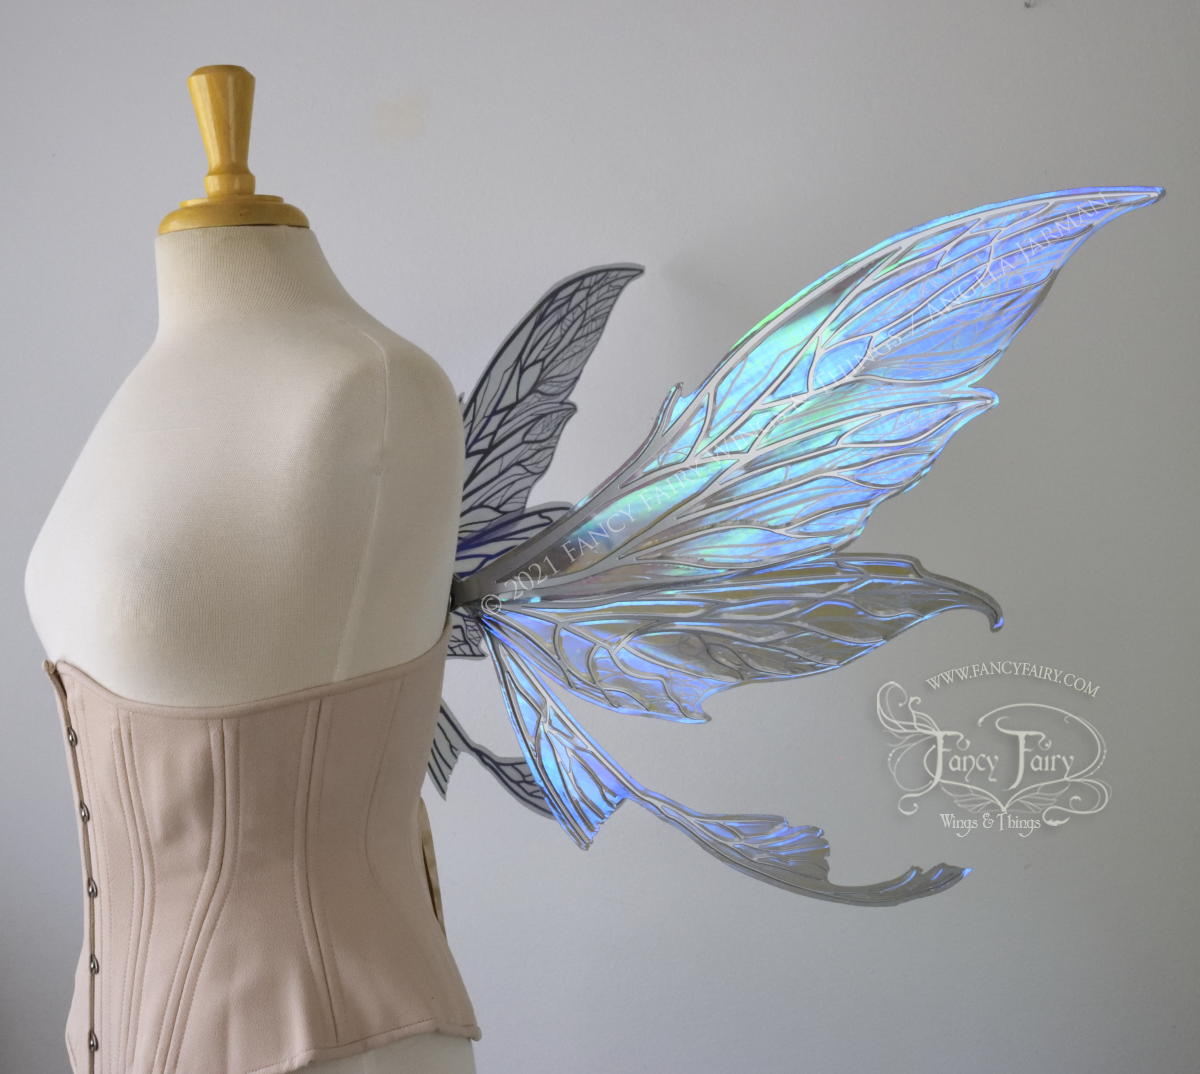 Colette Convertible Iridescent "Pix" Fairy Wings in Dark Crystal with Silver veins